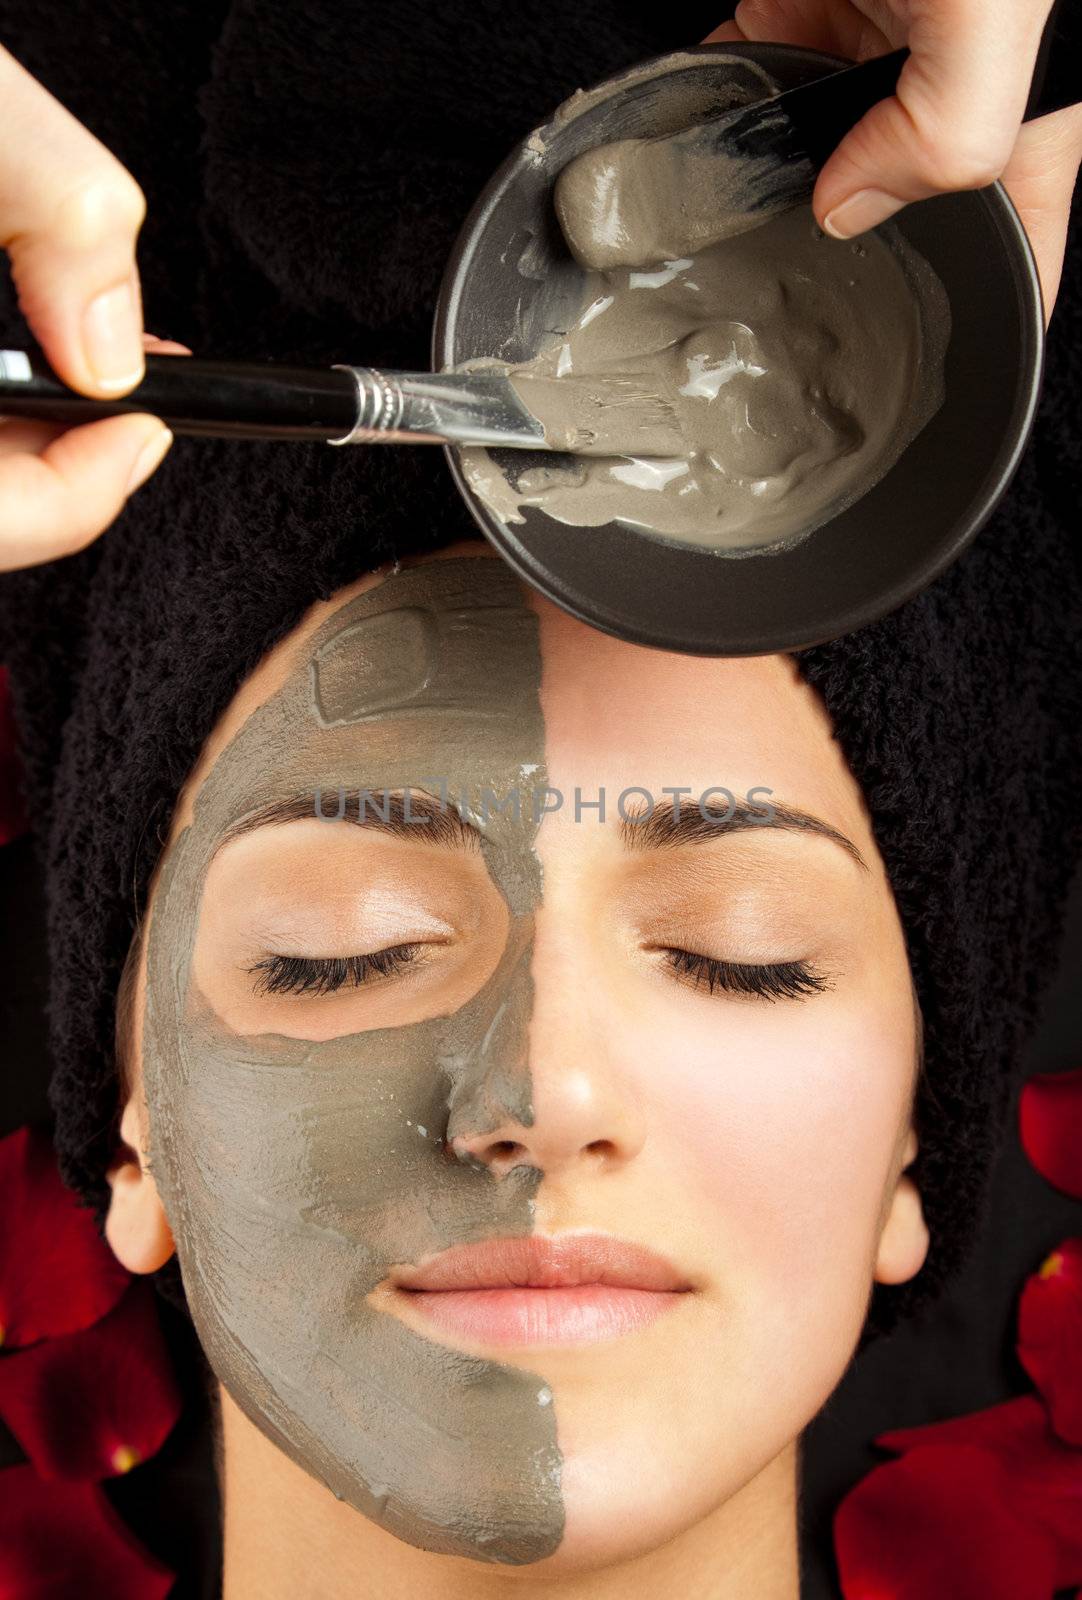 applying clay mask on young woman's face, half covered